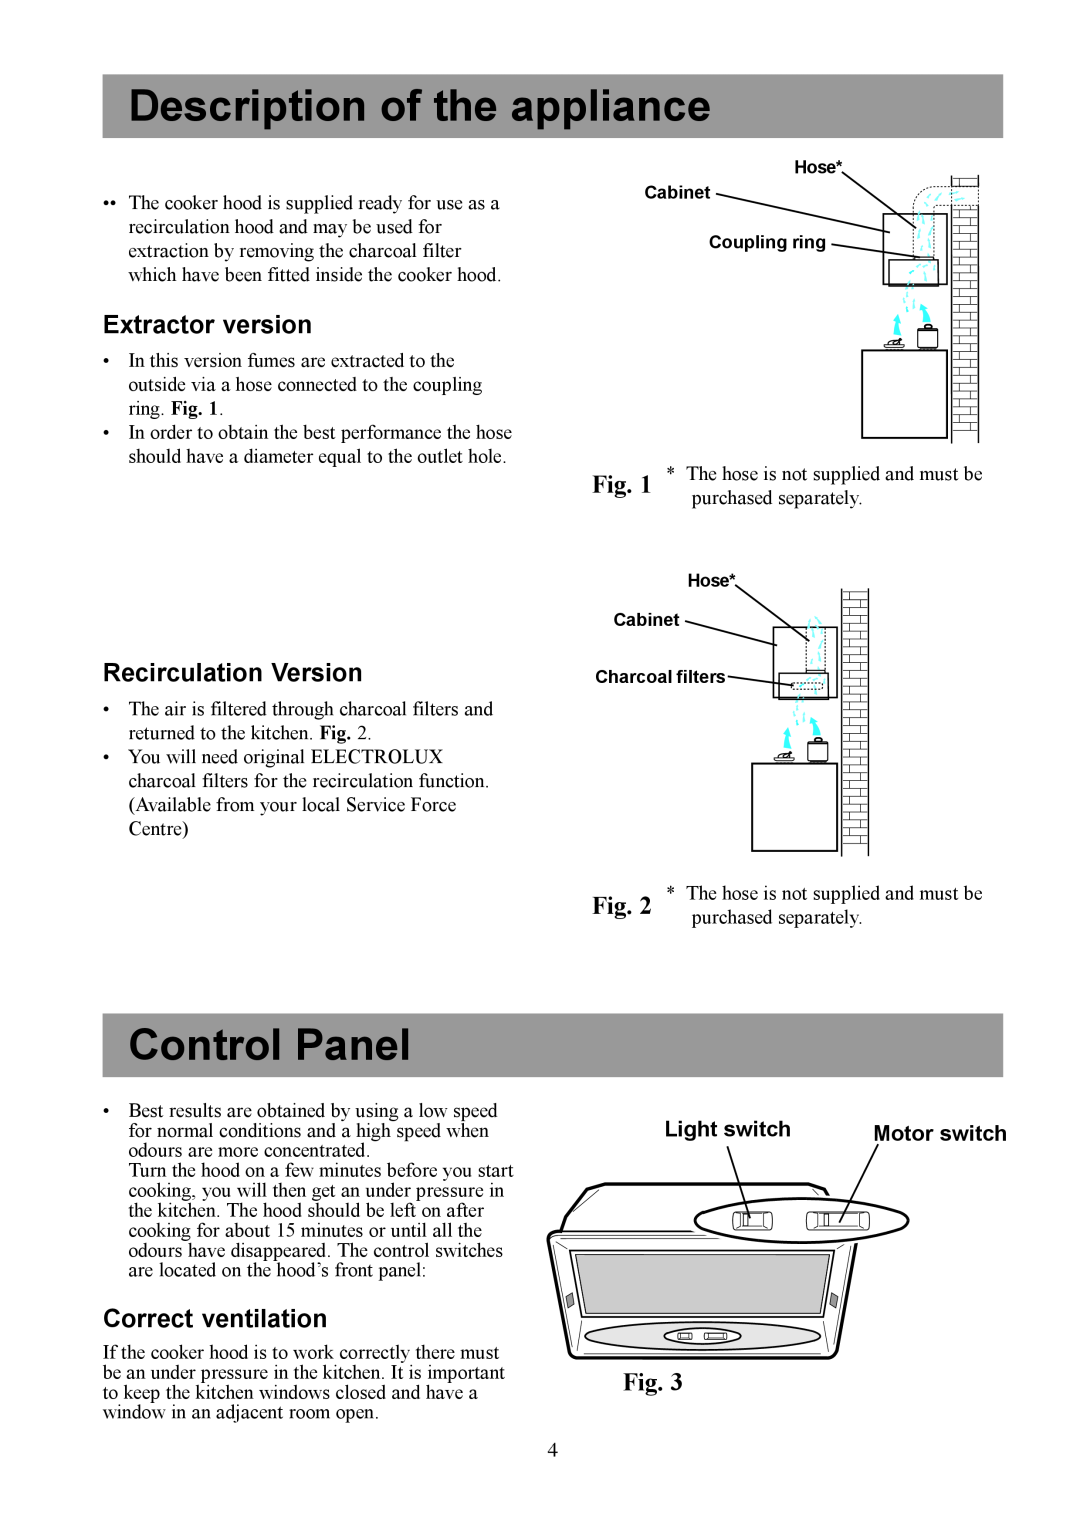 Electrolux EFG 535 Description of the appliance, Control Panel, Extractor version, Recirculation Version, Light switch 